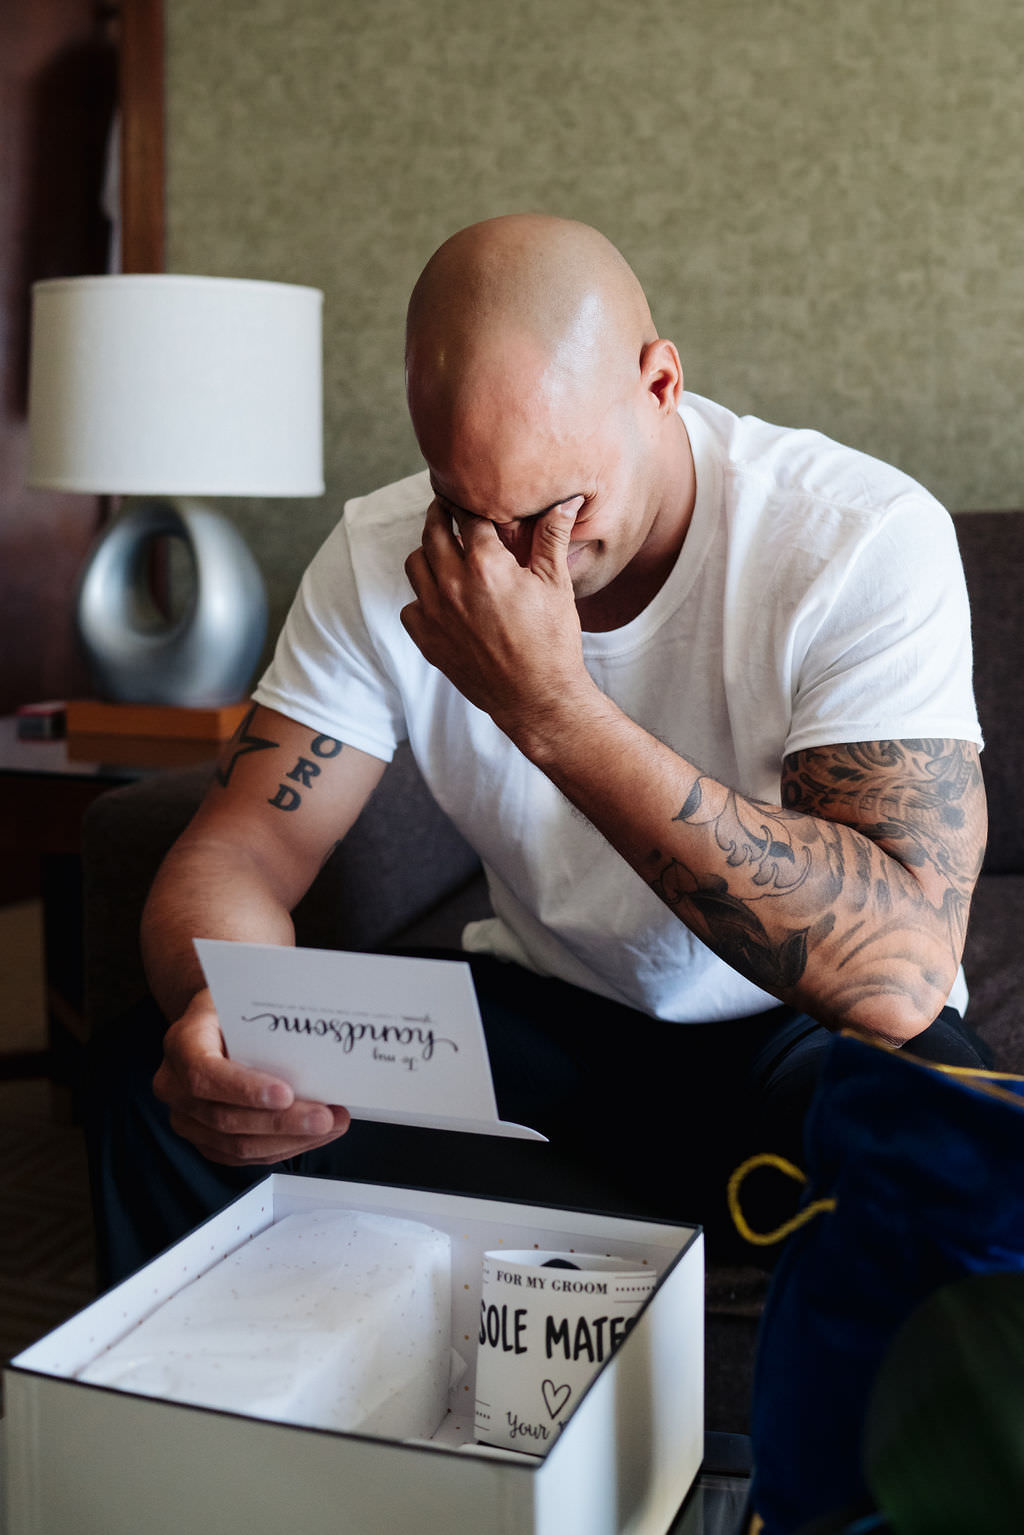 Groom Getting Ready Portrait, To My Groom Gift Box, Crying While Reading Letter from Bride | Photographer Grind & Press Photography